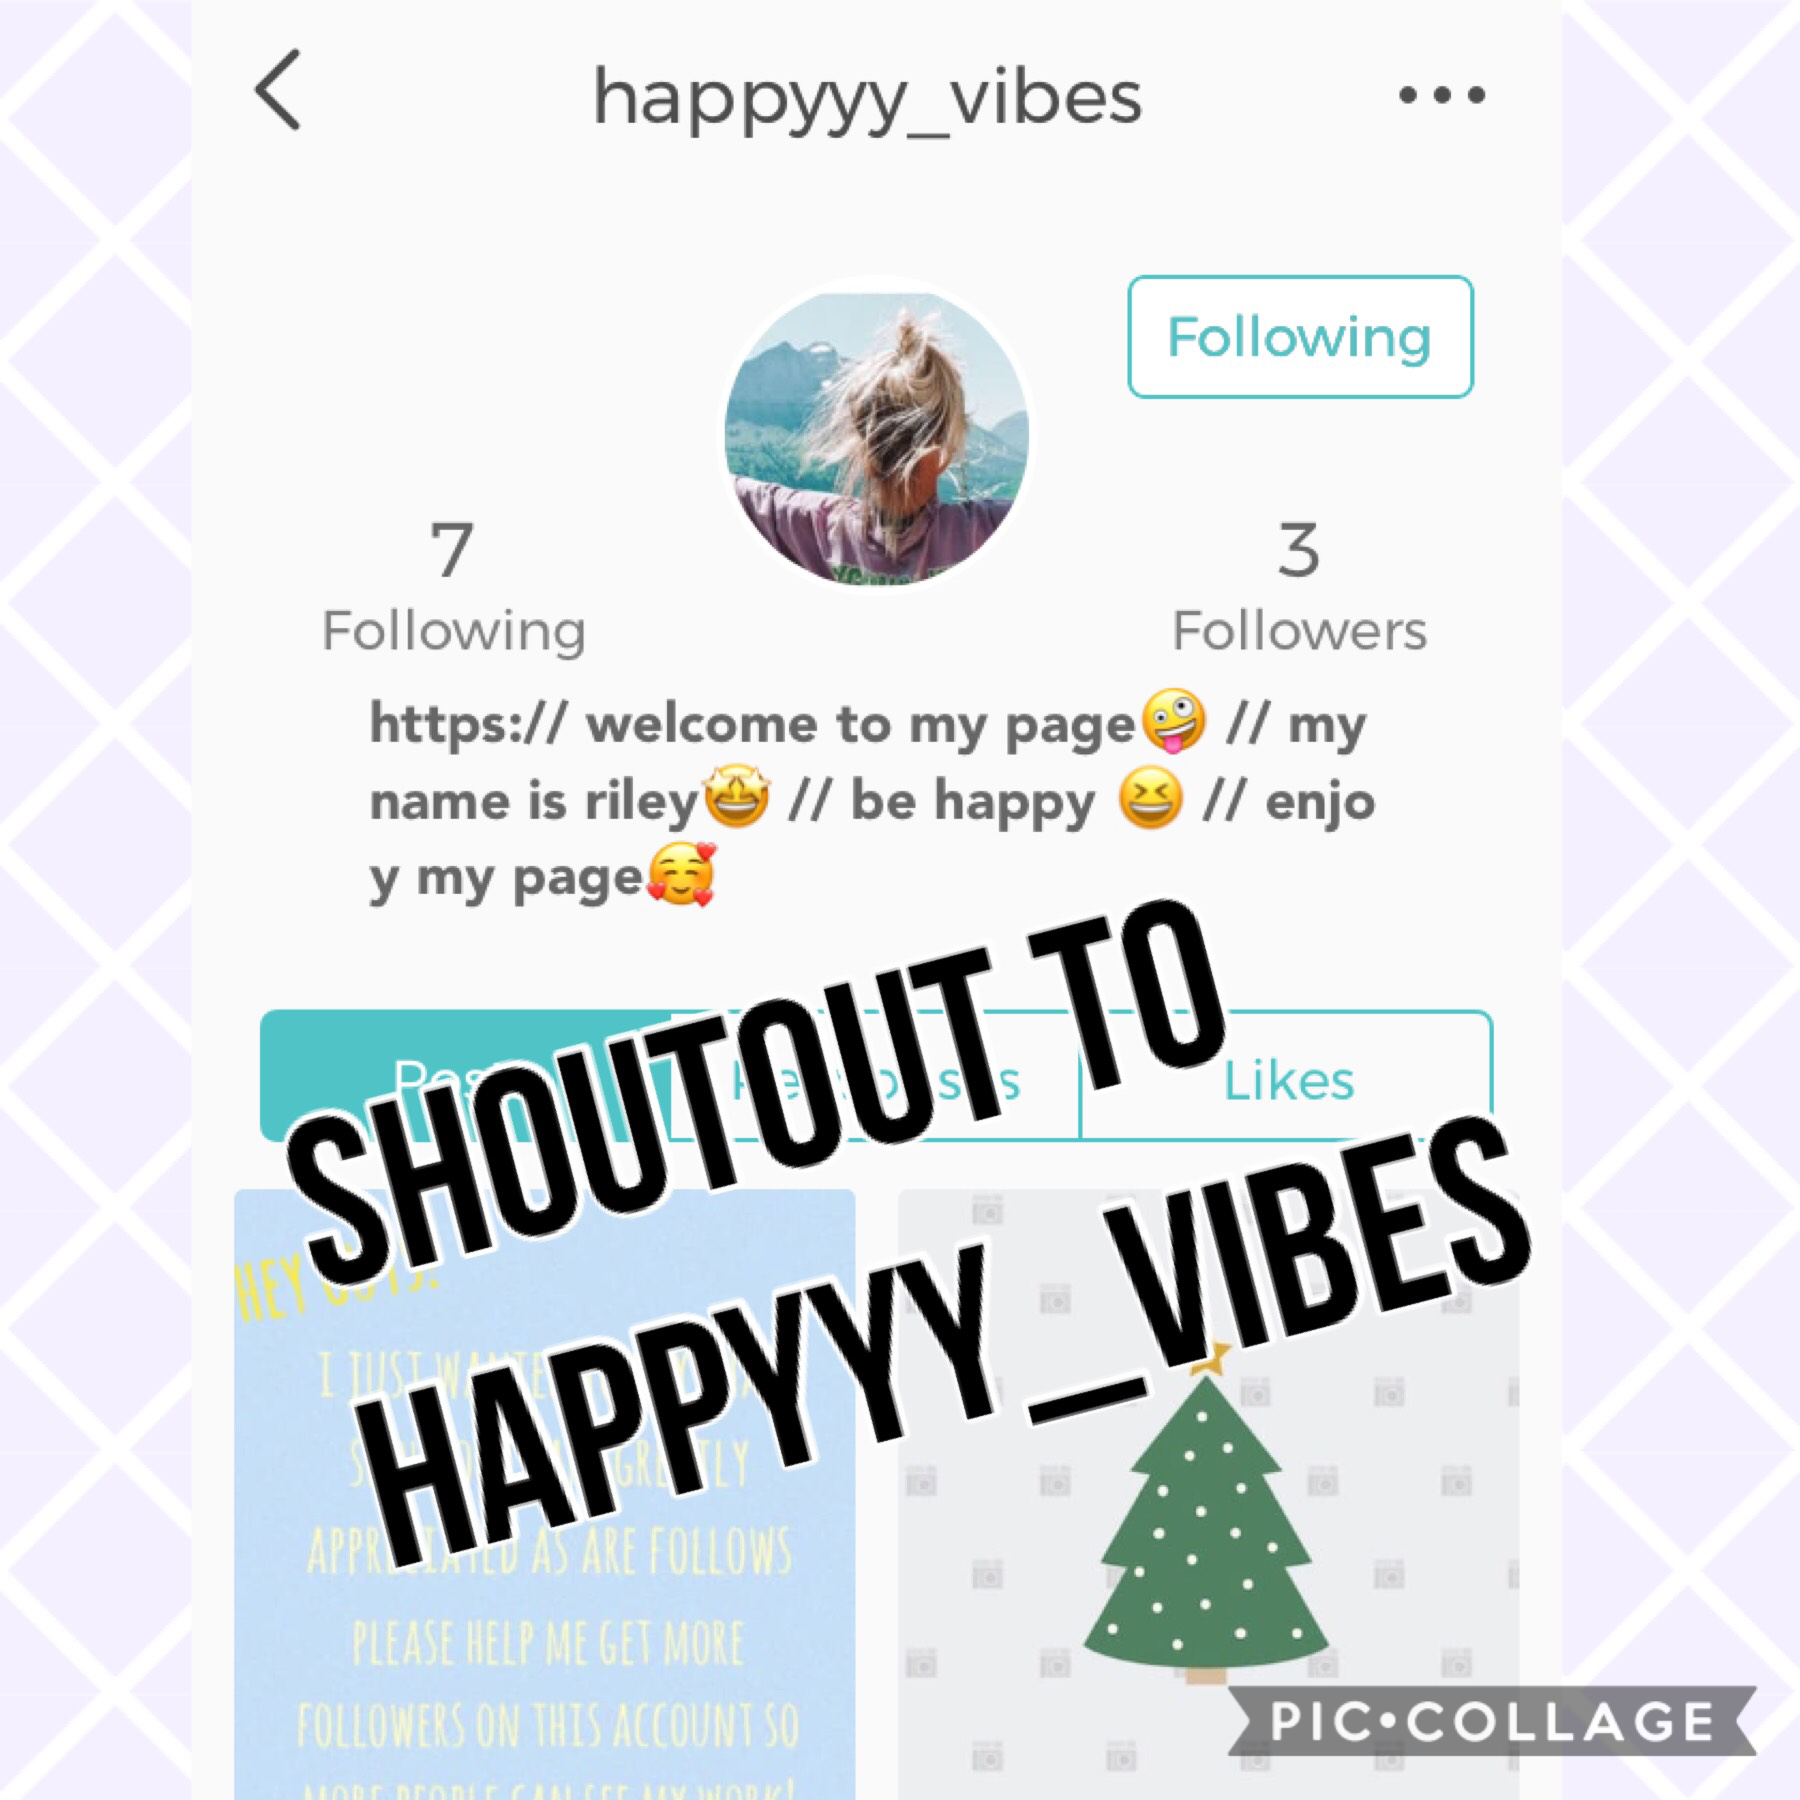 ❤️Tap❤️
This is an amazing person who just started her account and I would love to help her so please go follow her!!!!❤️❤️❤️❤️